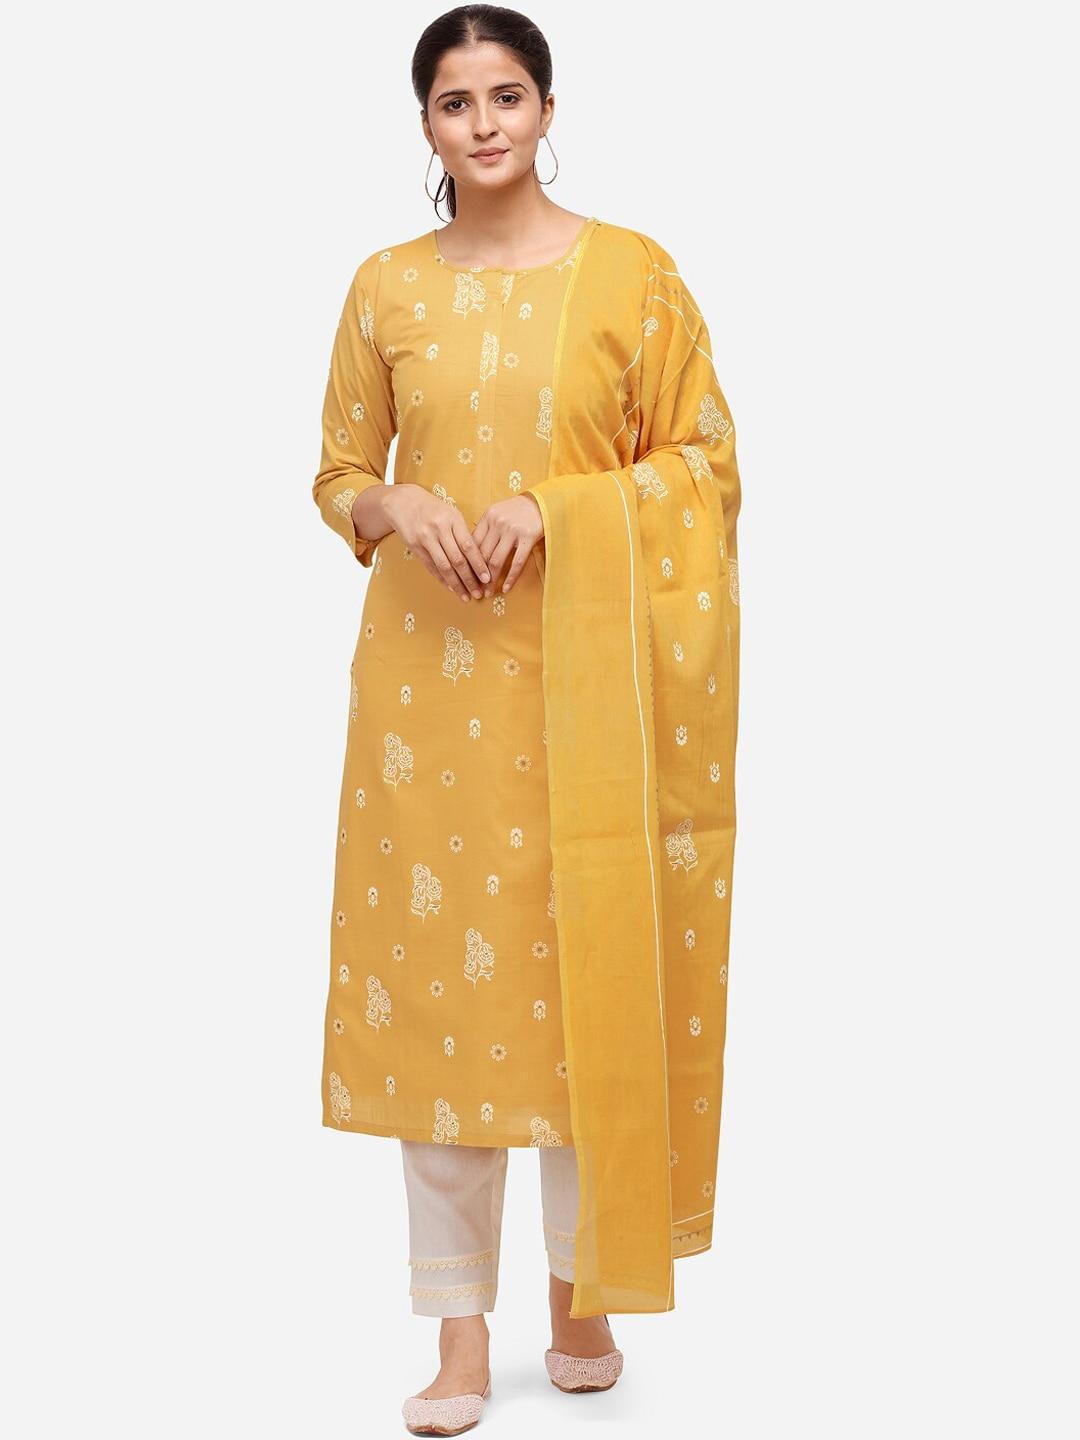 kvsfab mustard yellow & off-white cotton blend unstitched dress material